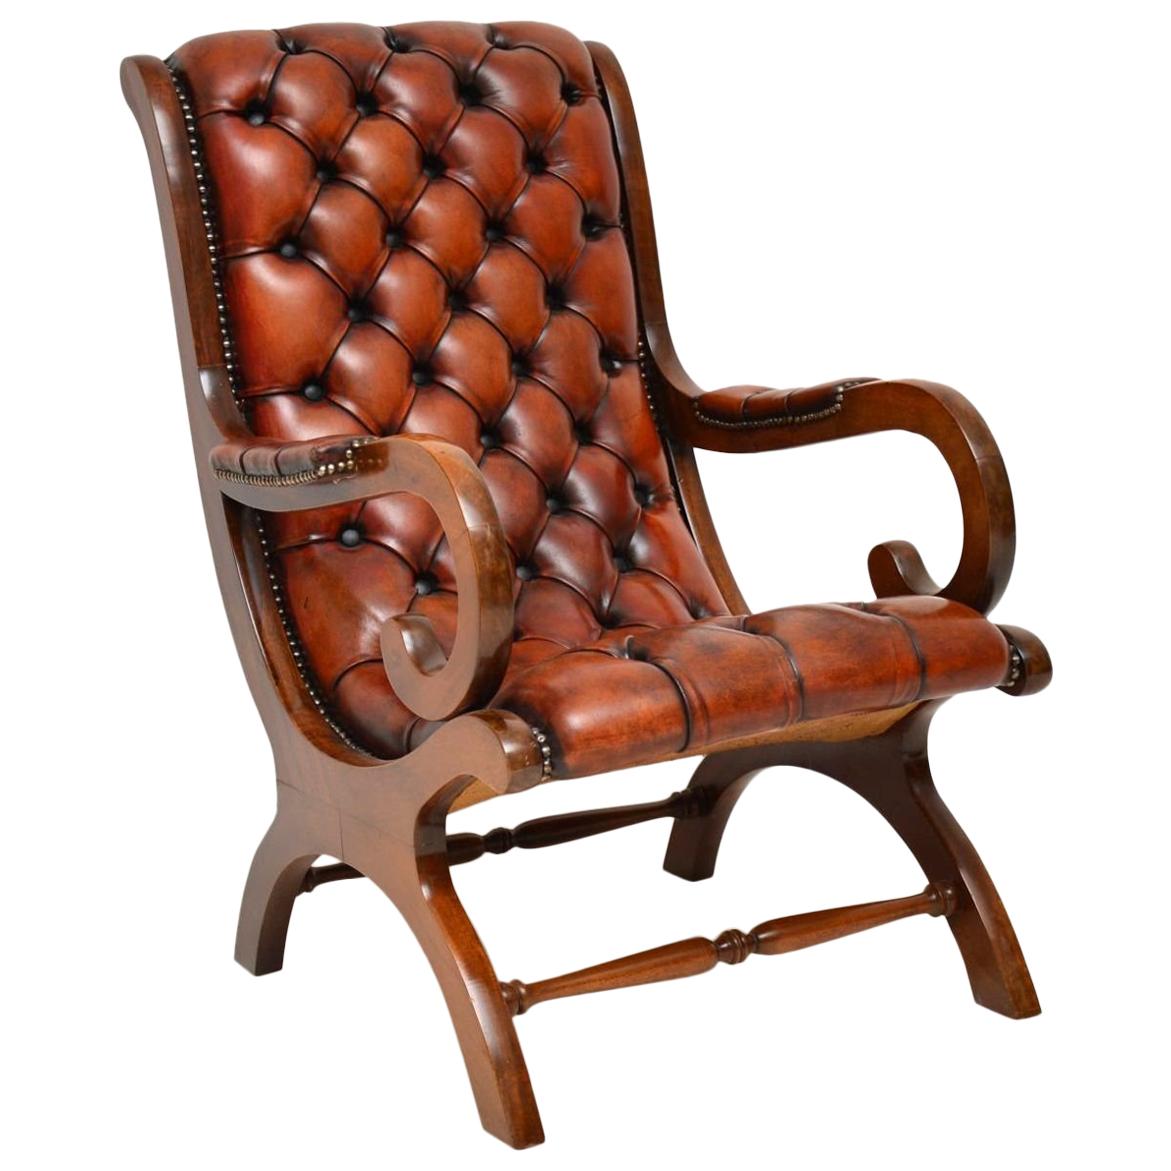 Antique Regency Style Leather and Mahogany Armchair